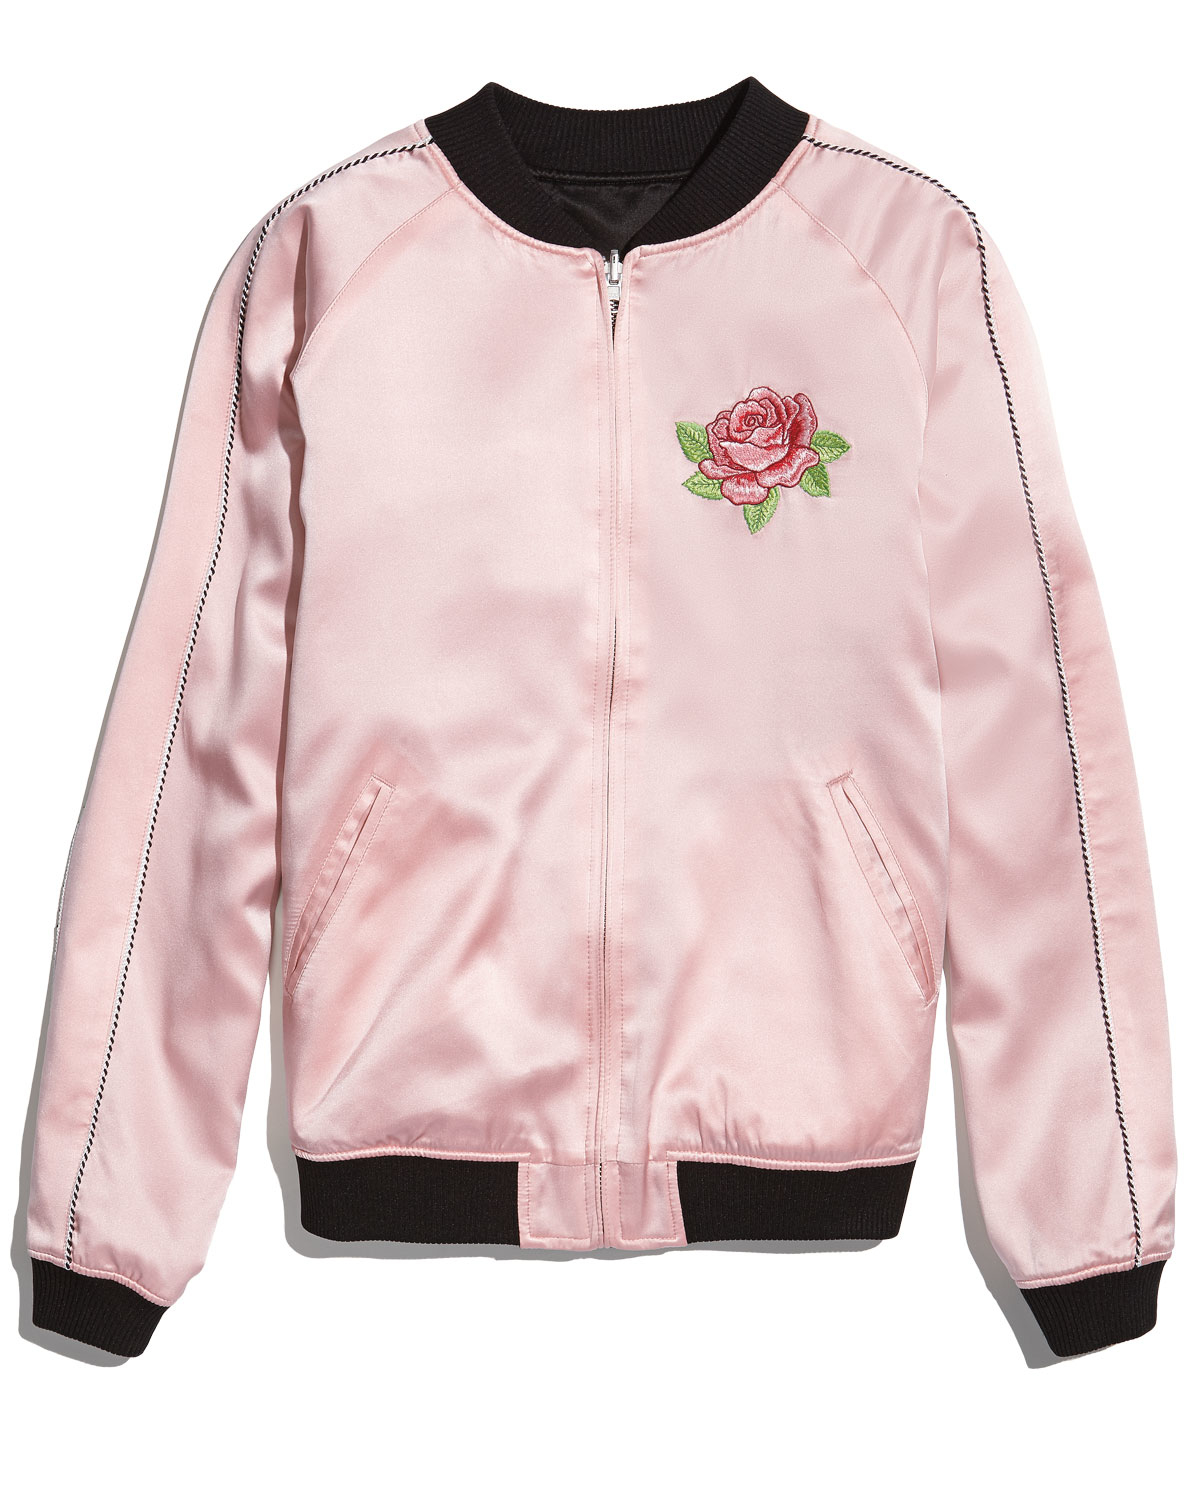 Opening ceremony Reversible Embroidered Silk Varsity Jacket in Pink | Lyst